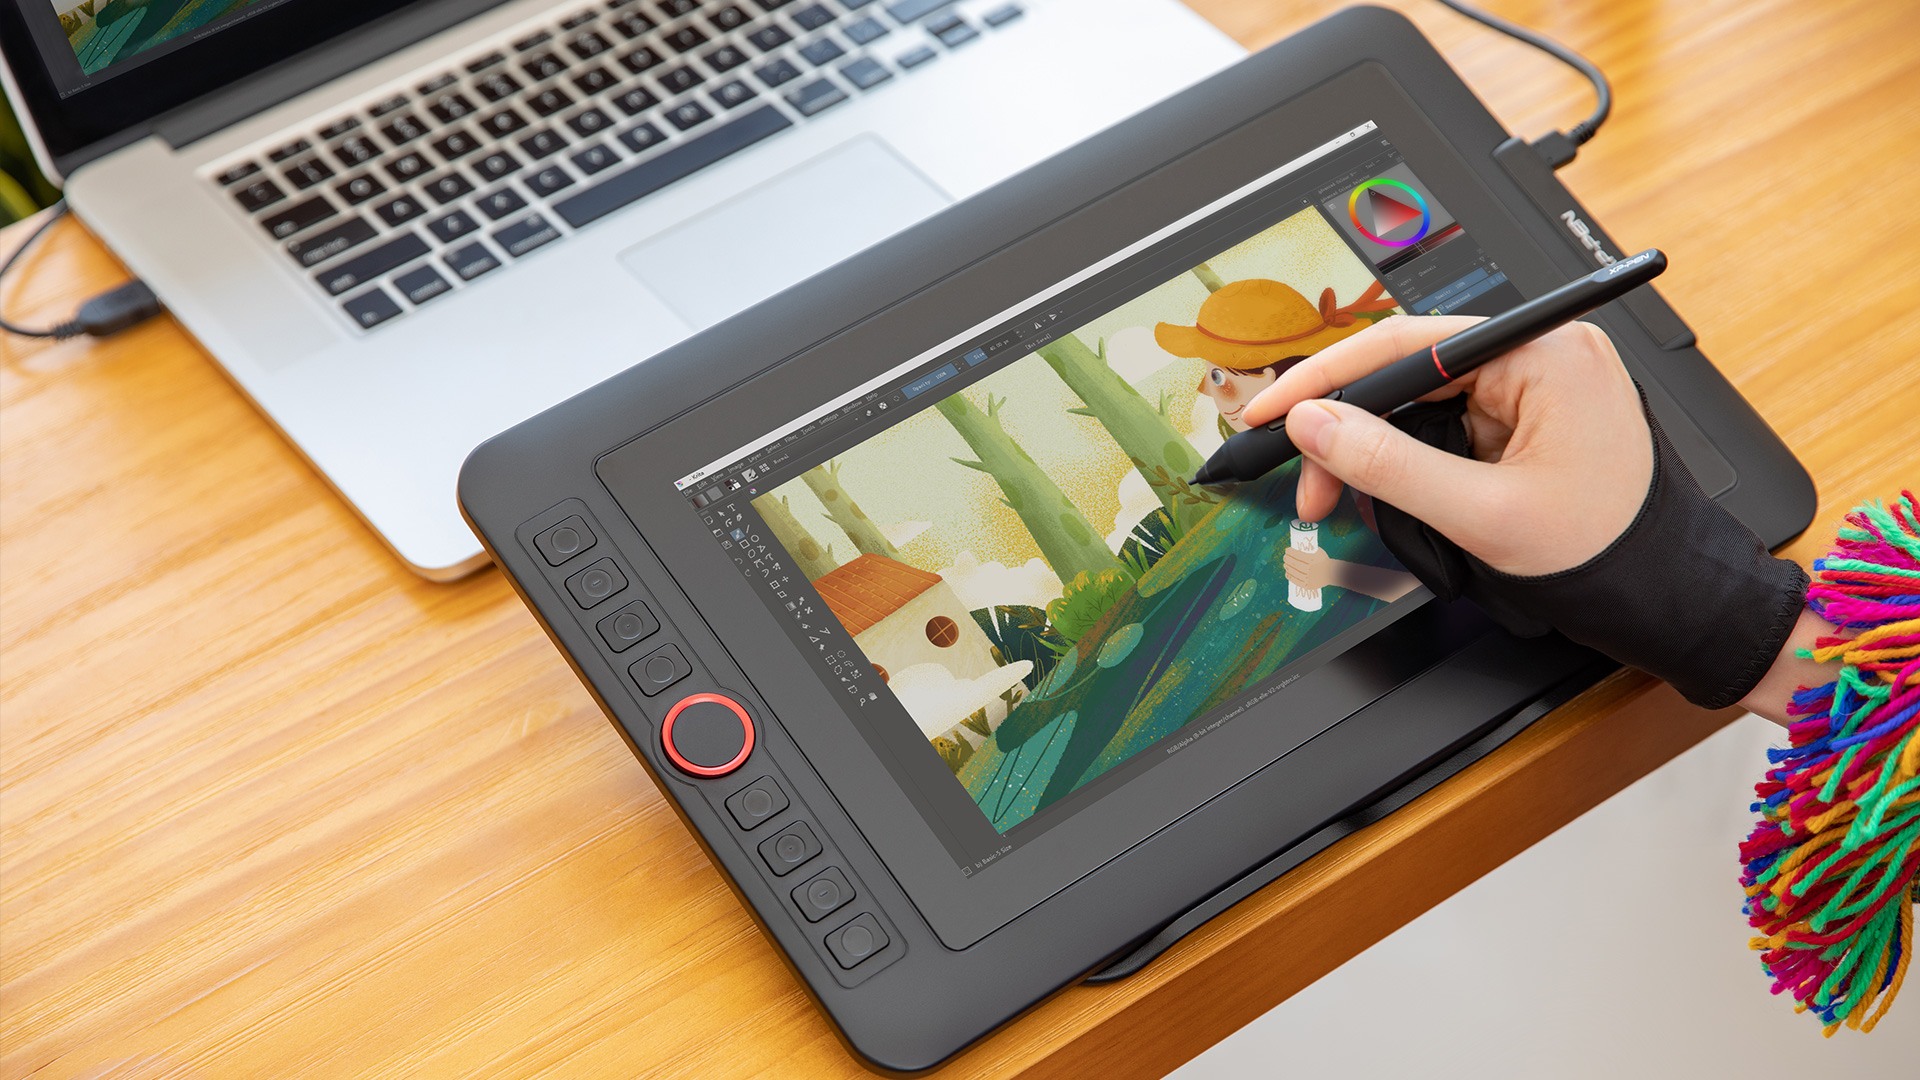  digital writing , drawing and painting on xp-pen artist 12 pro tablet monitor